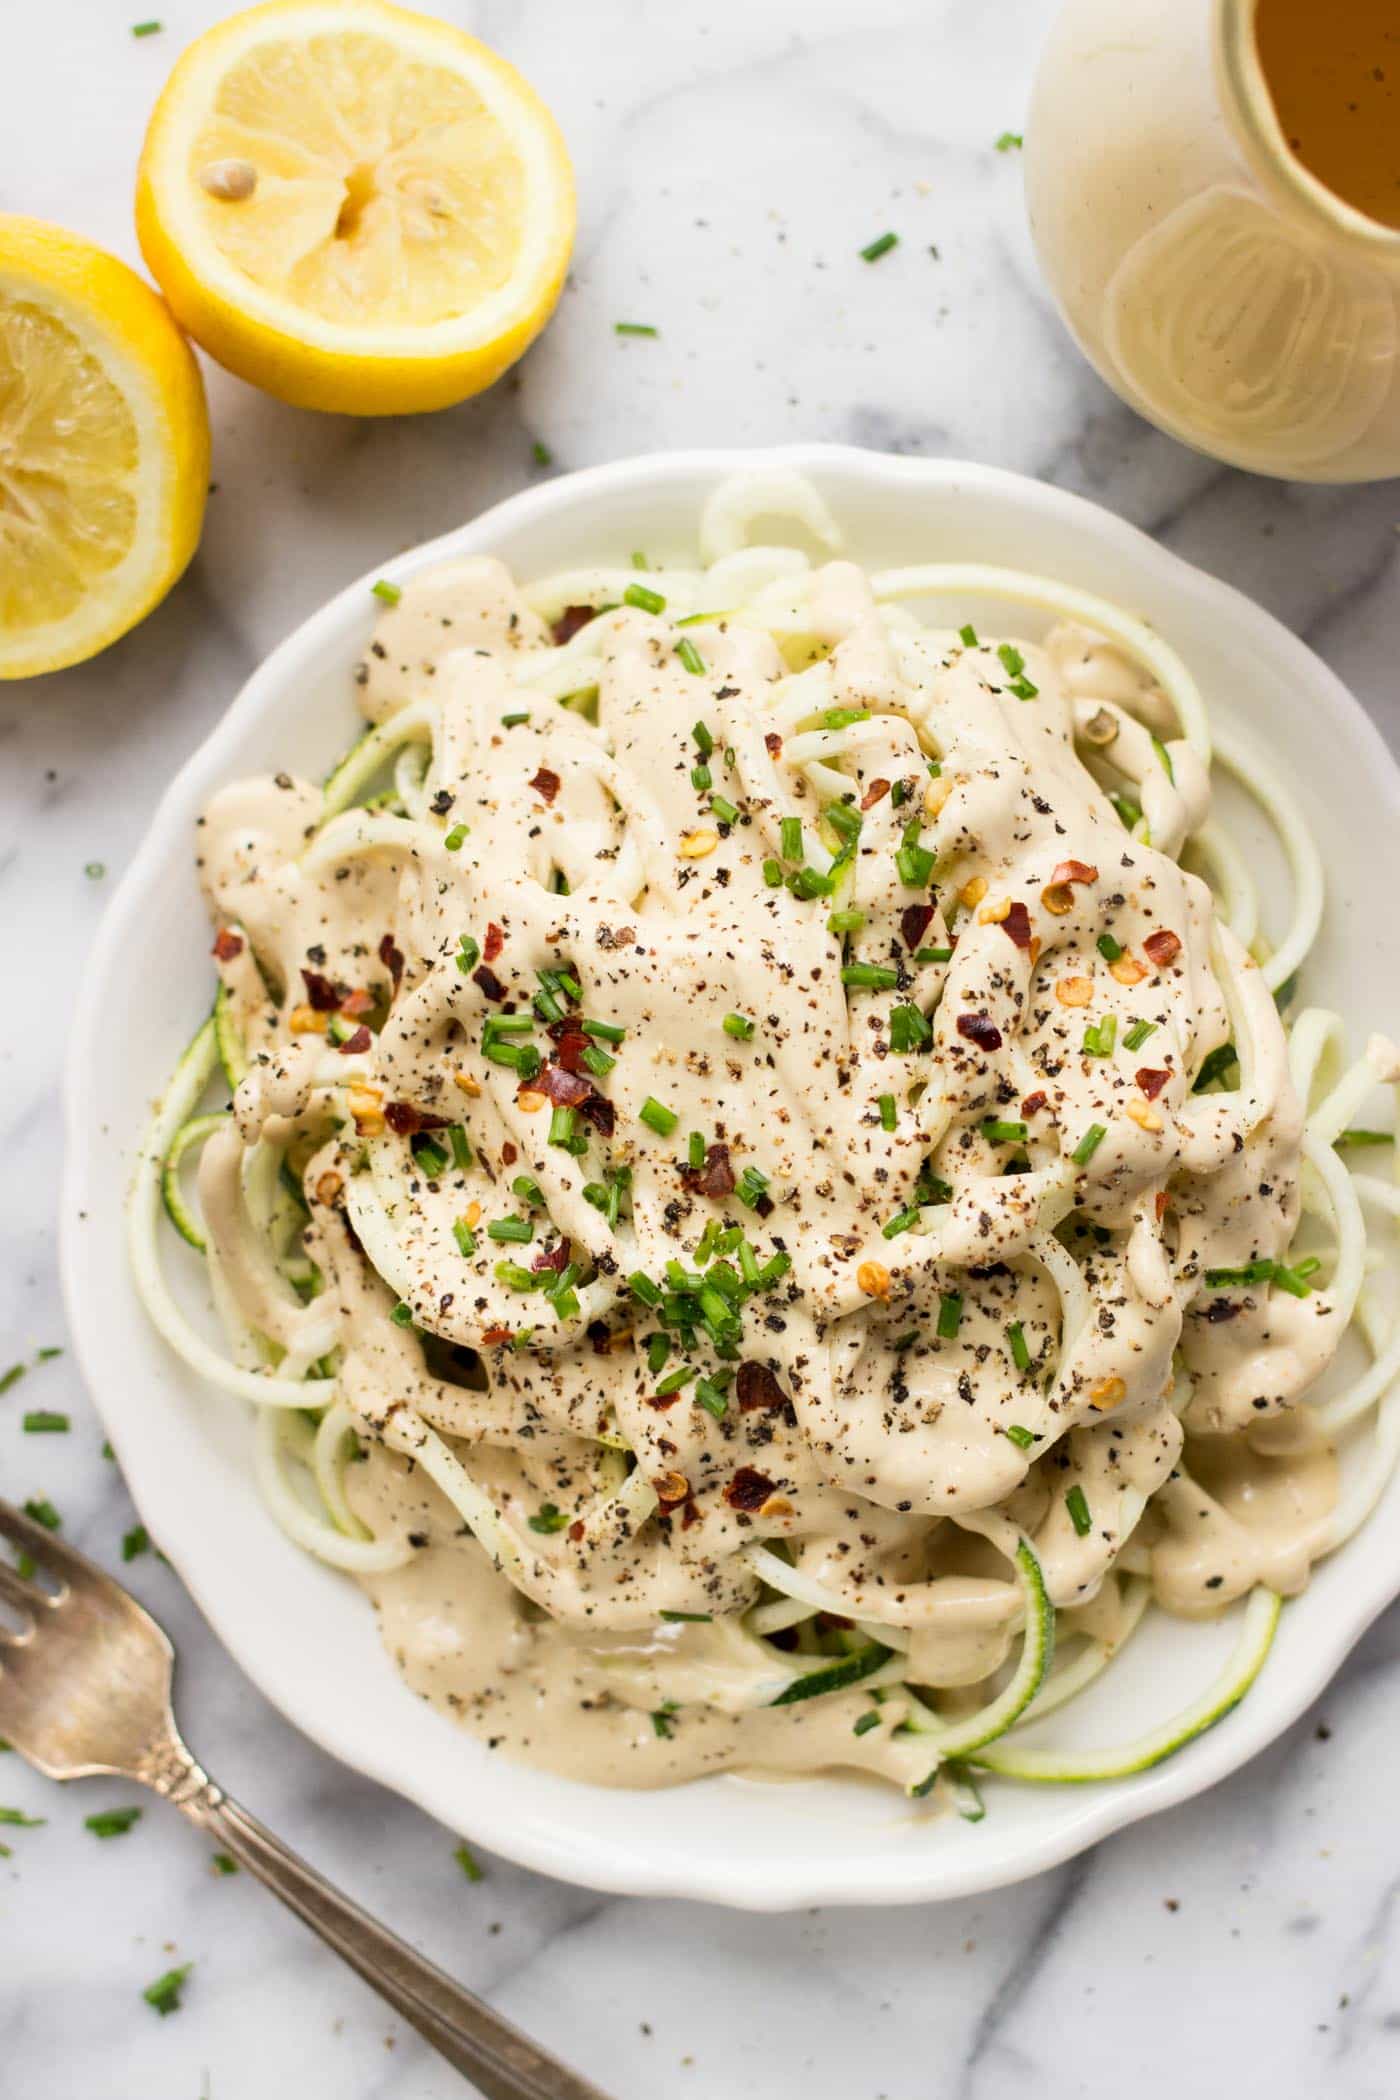 Zucchini Noodles with a Vegan Lemon Cream Sauce -- quick, easy, healthy and DELISH!